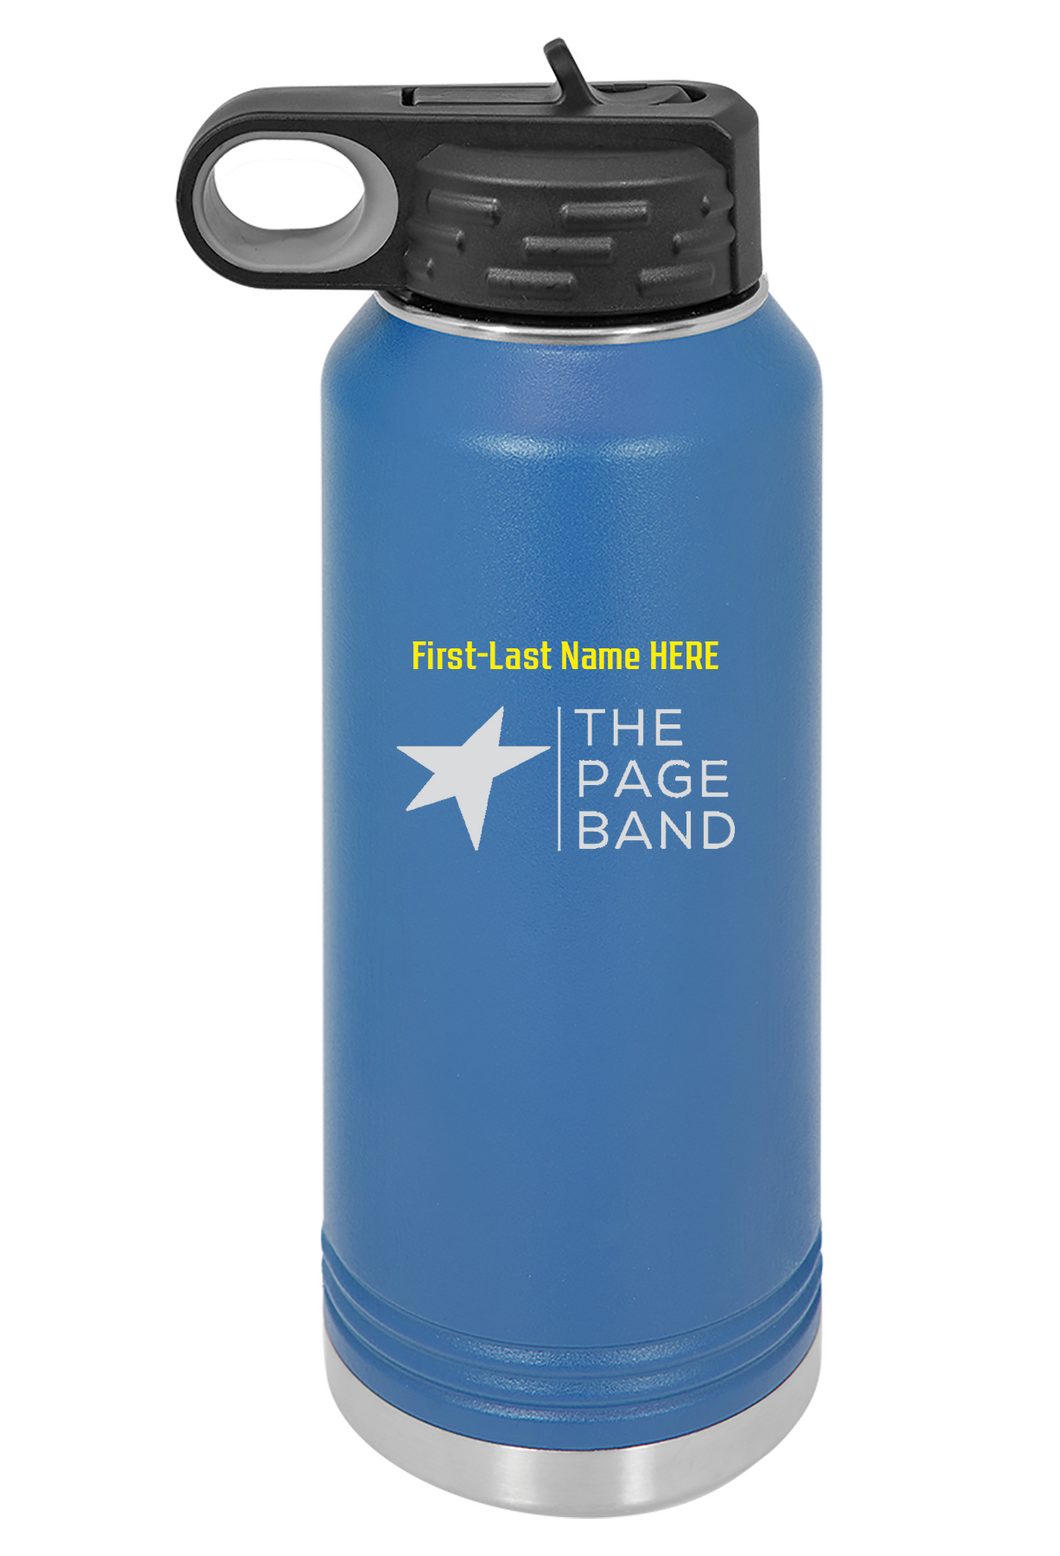 32 oz. Royal Blue Water Bottle- Laser Engraved- THE PAGE BAND Logo...Personalized